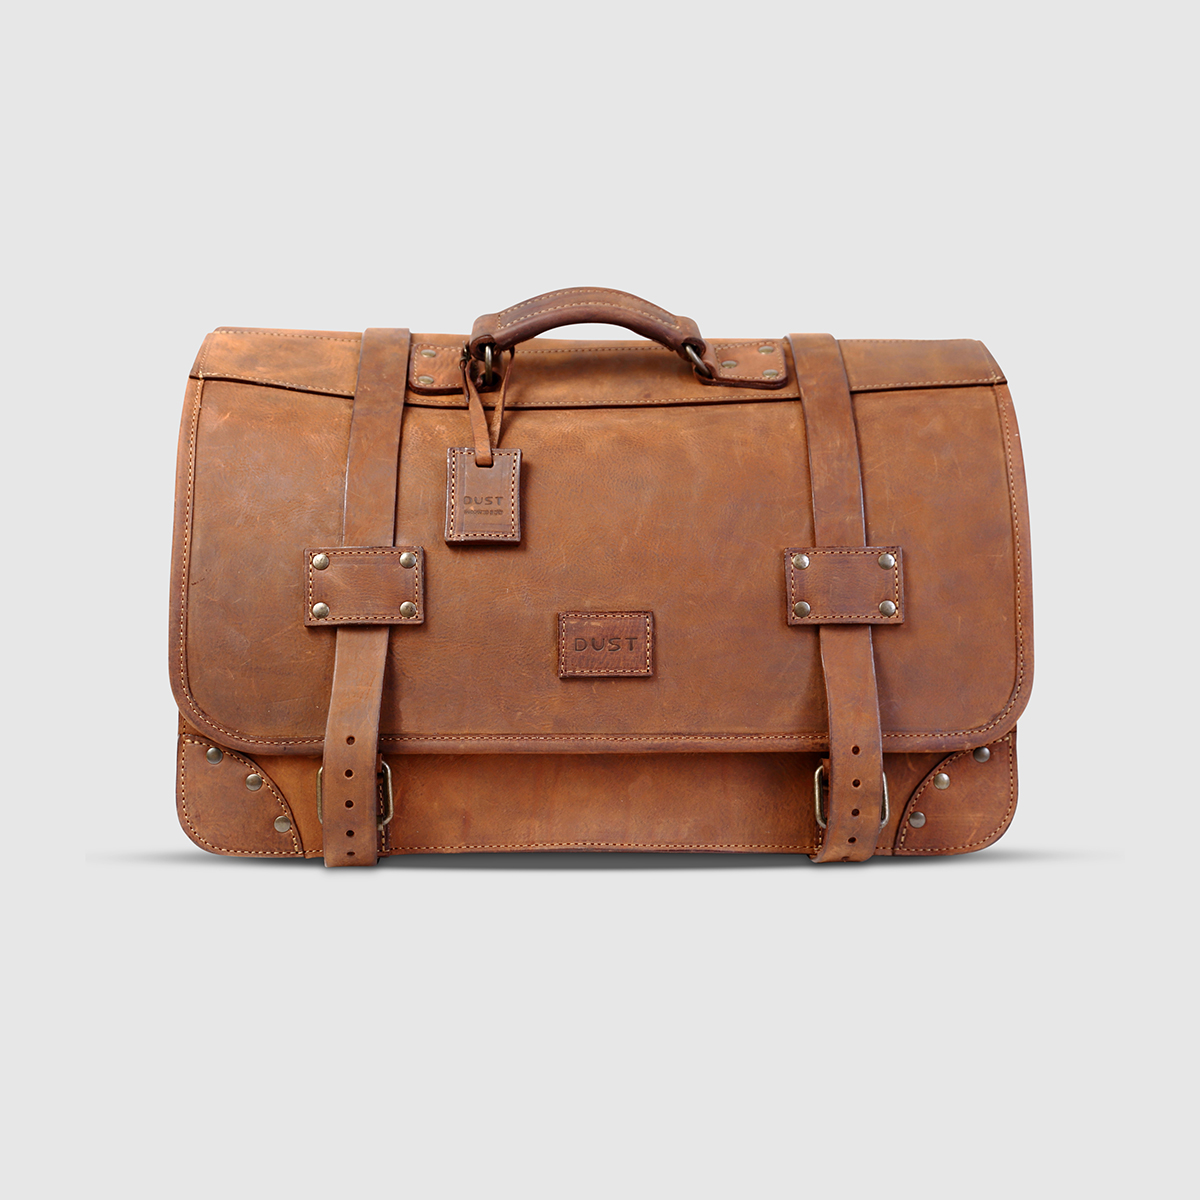 The Dust Company Legacy Leather Shoulder Bag